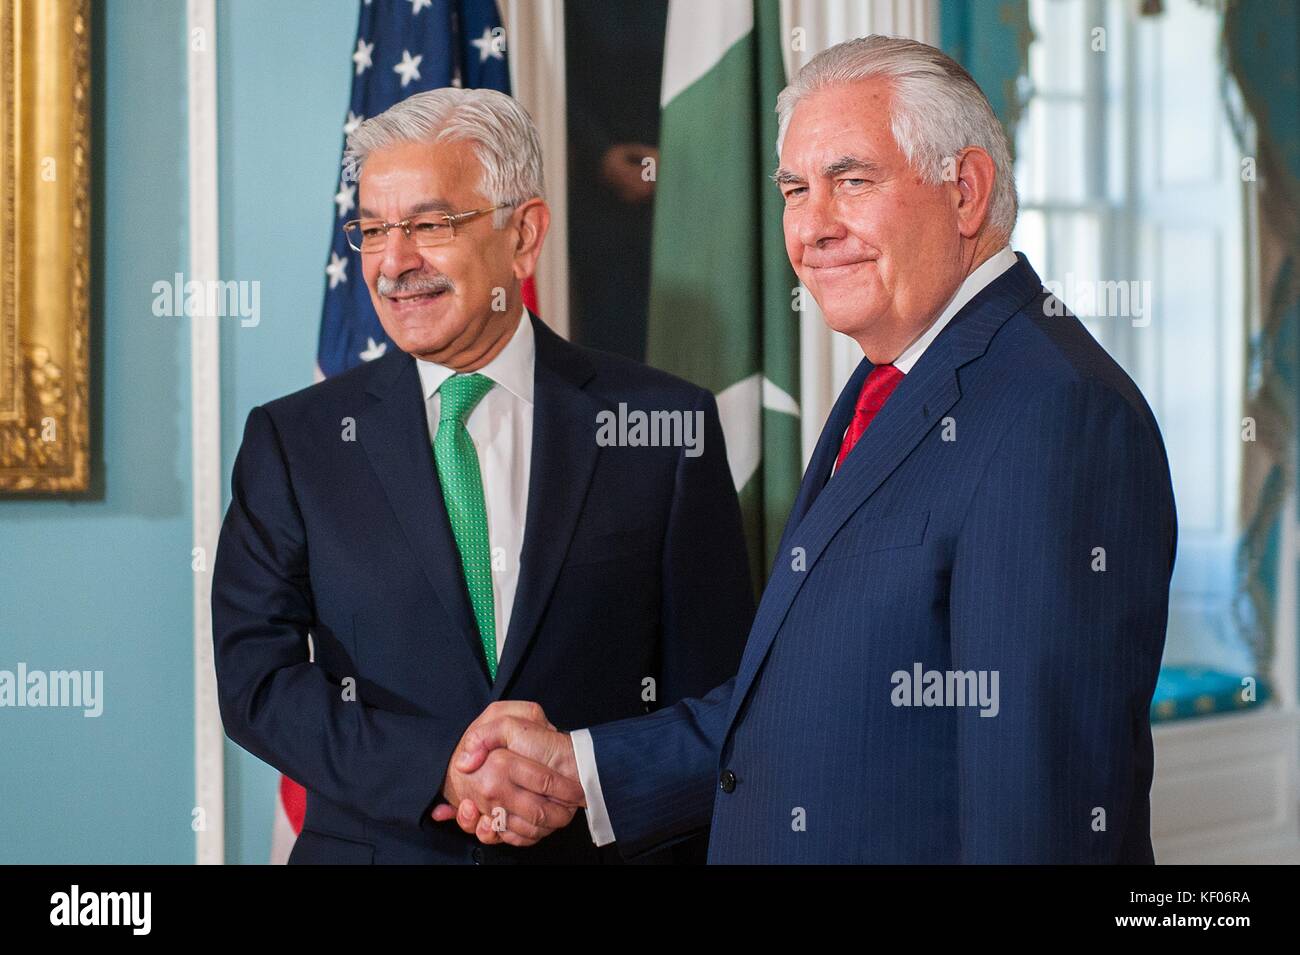 Pakistani Foreign Minister Khawaja Muhammad Asif (left) meets with U.S. Secretary of State Rex Tillerson at the U.S. Department of State October 4, 2017 in Washington, DC. Stock Photo